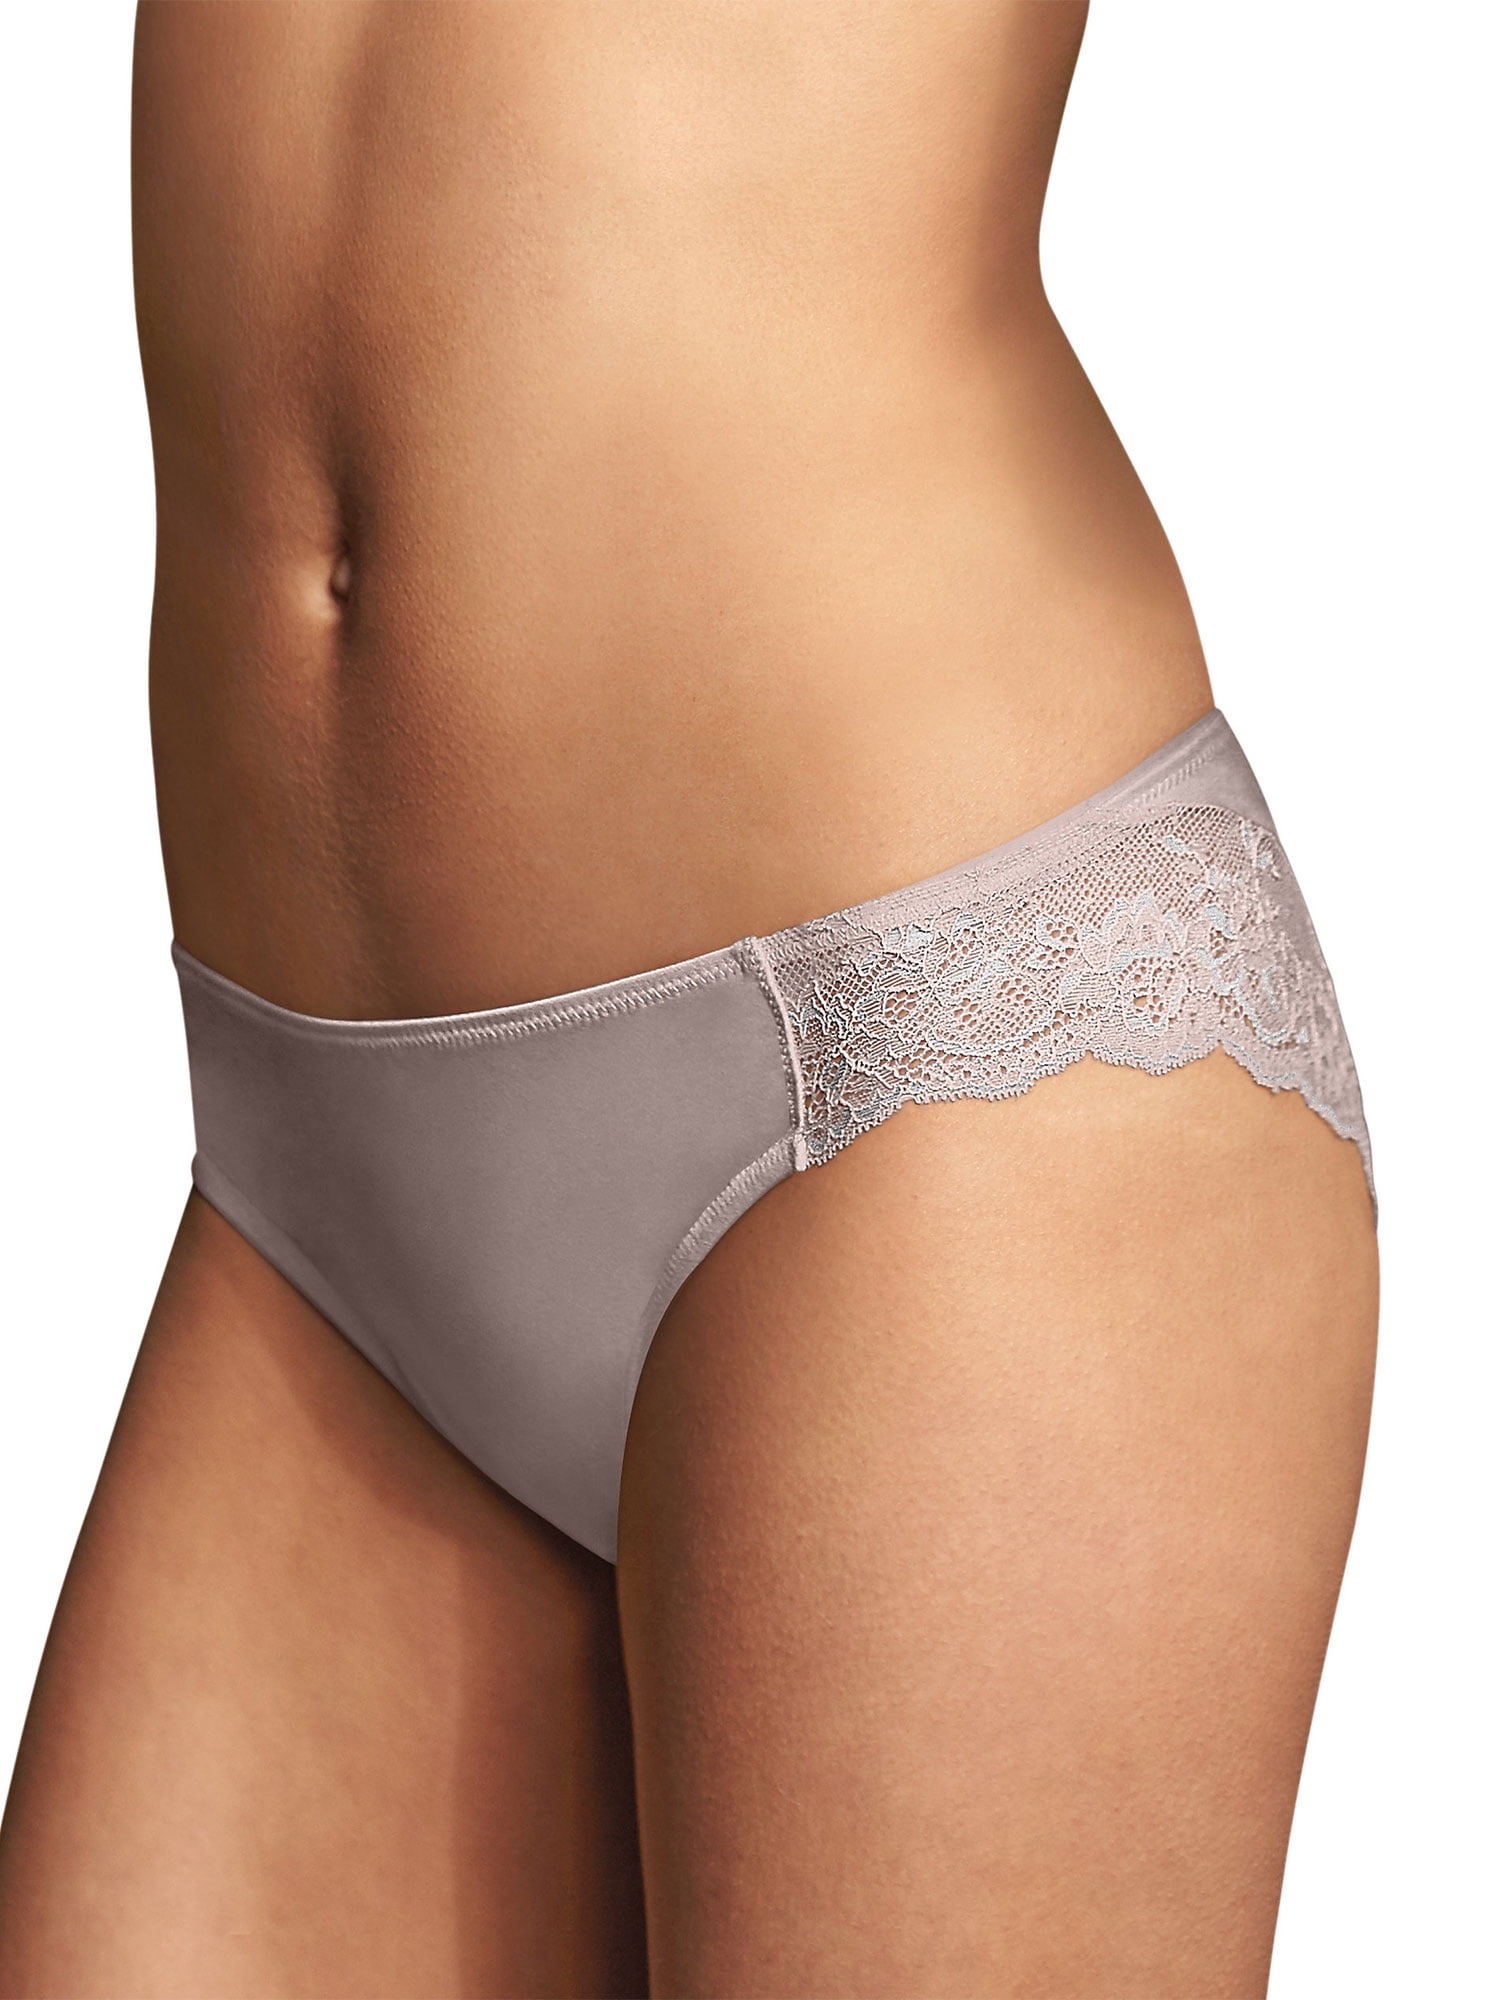 LILY Sexy Recycled Lace High Waist Brief Panties